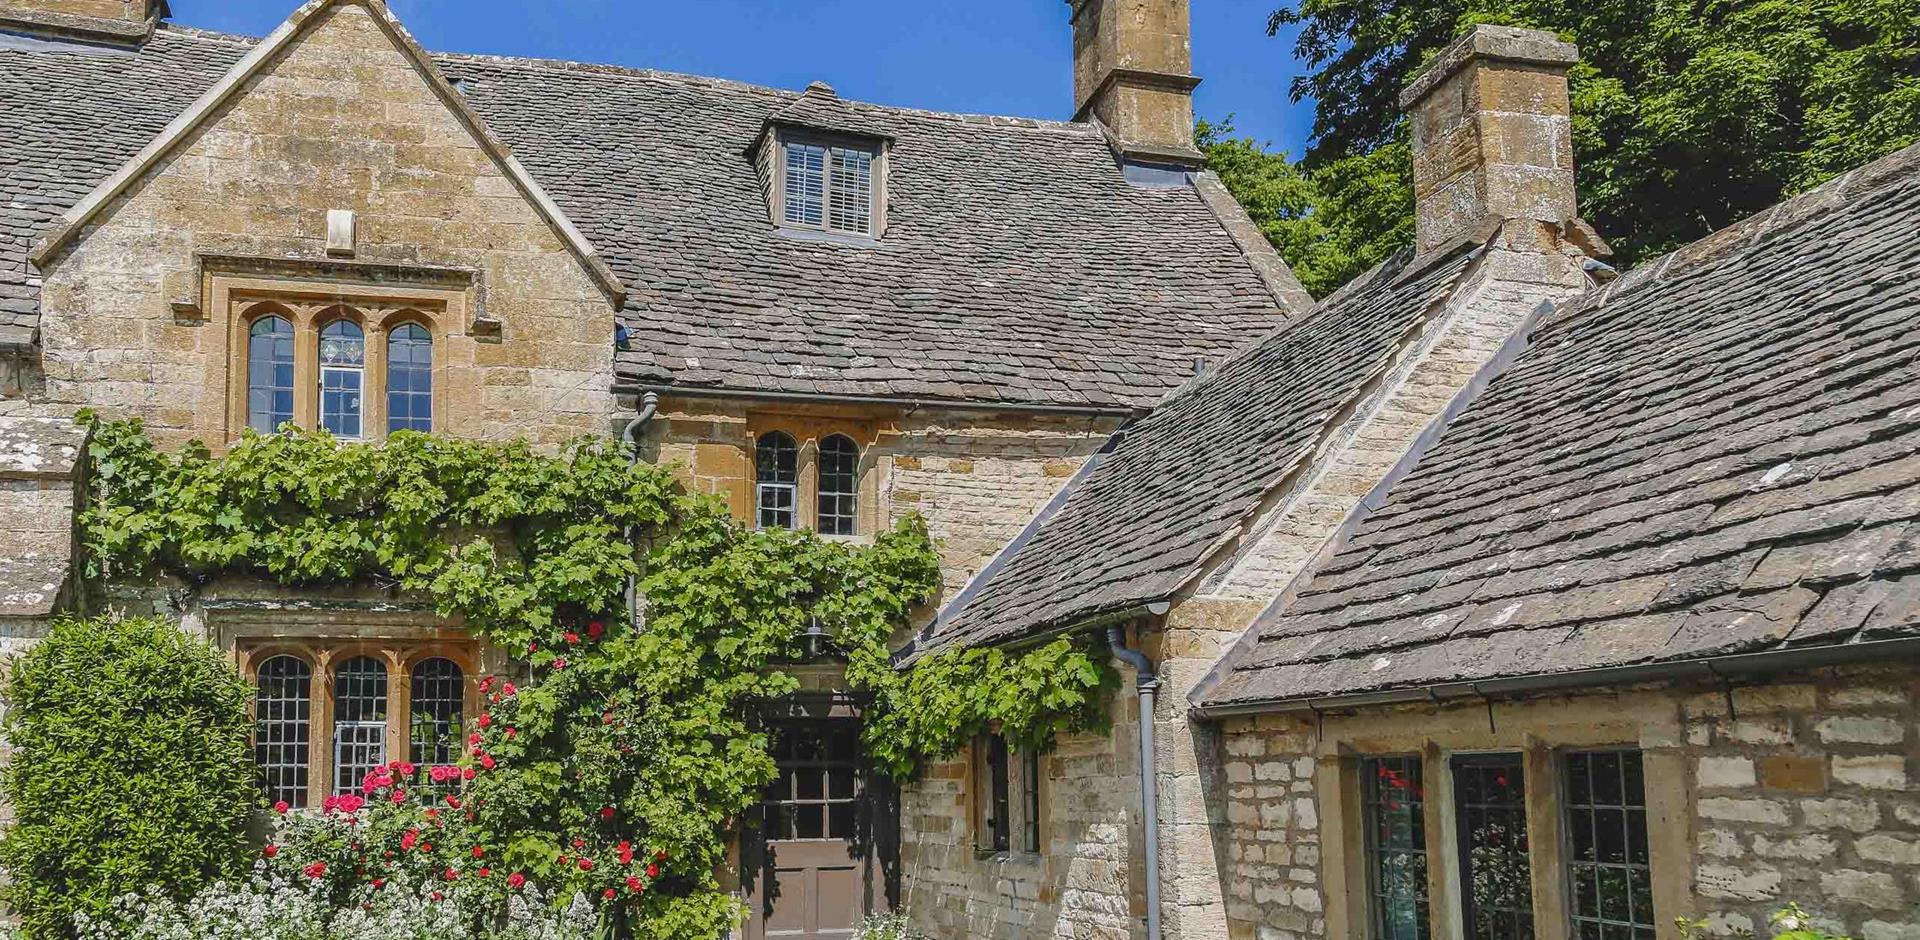 Temple Guiting Manor, The Cotswolds, UK